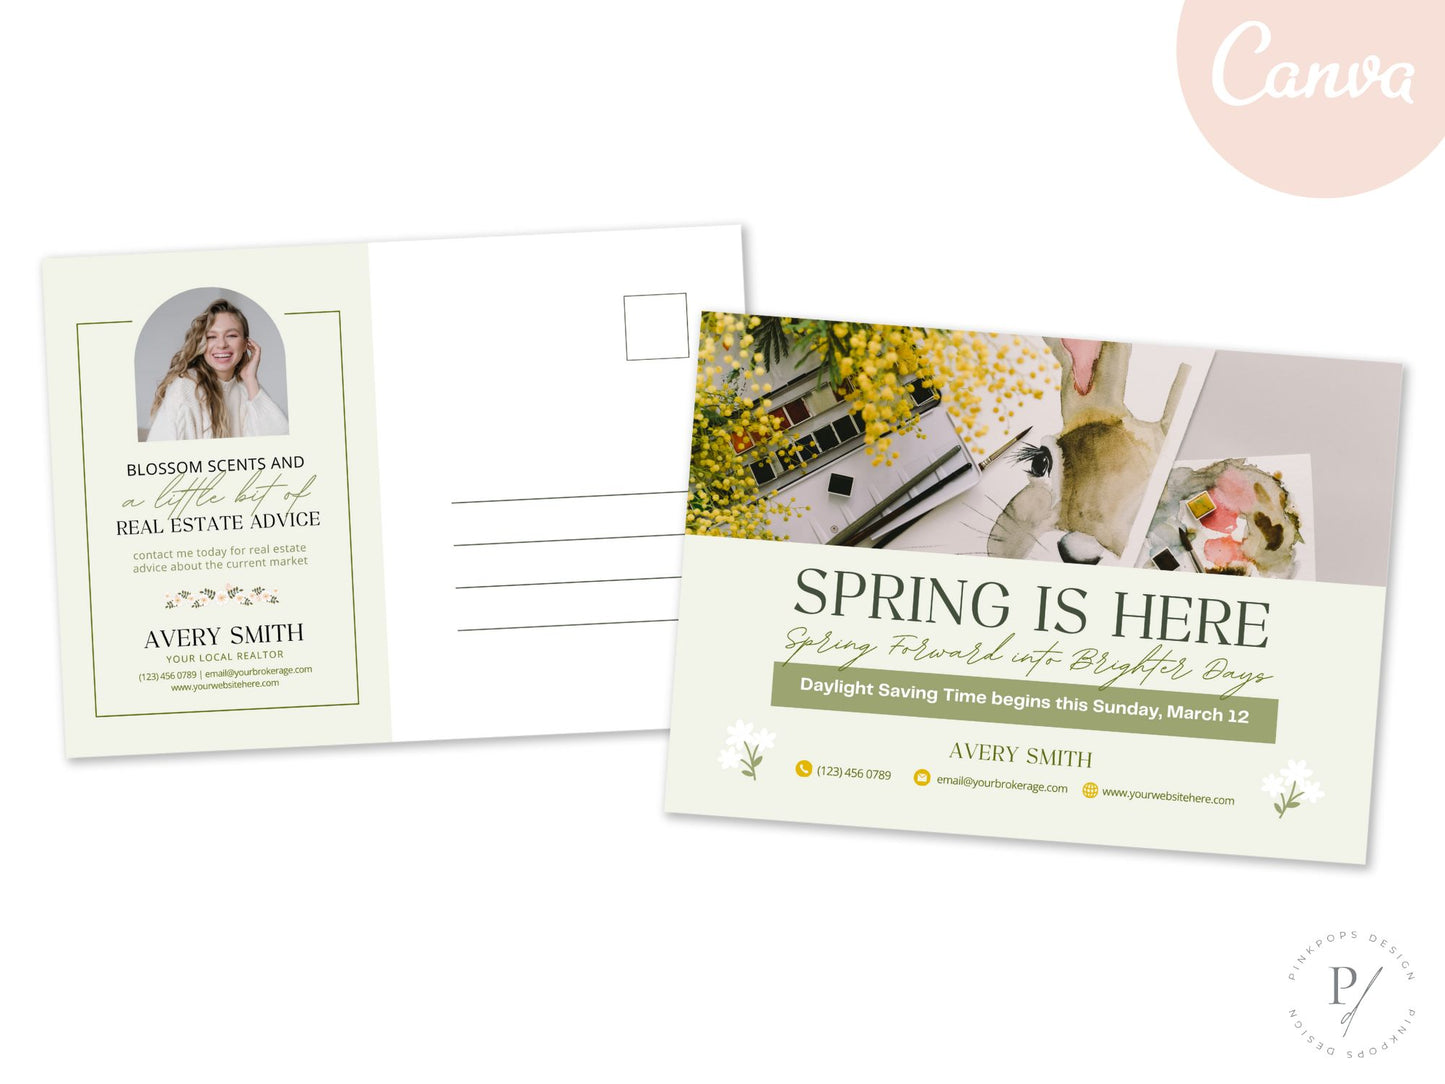 Spring is Here Postcard - Professionally designed real estate postcard celebrating the arrival of spring.